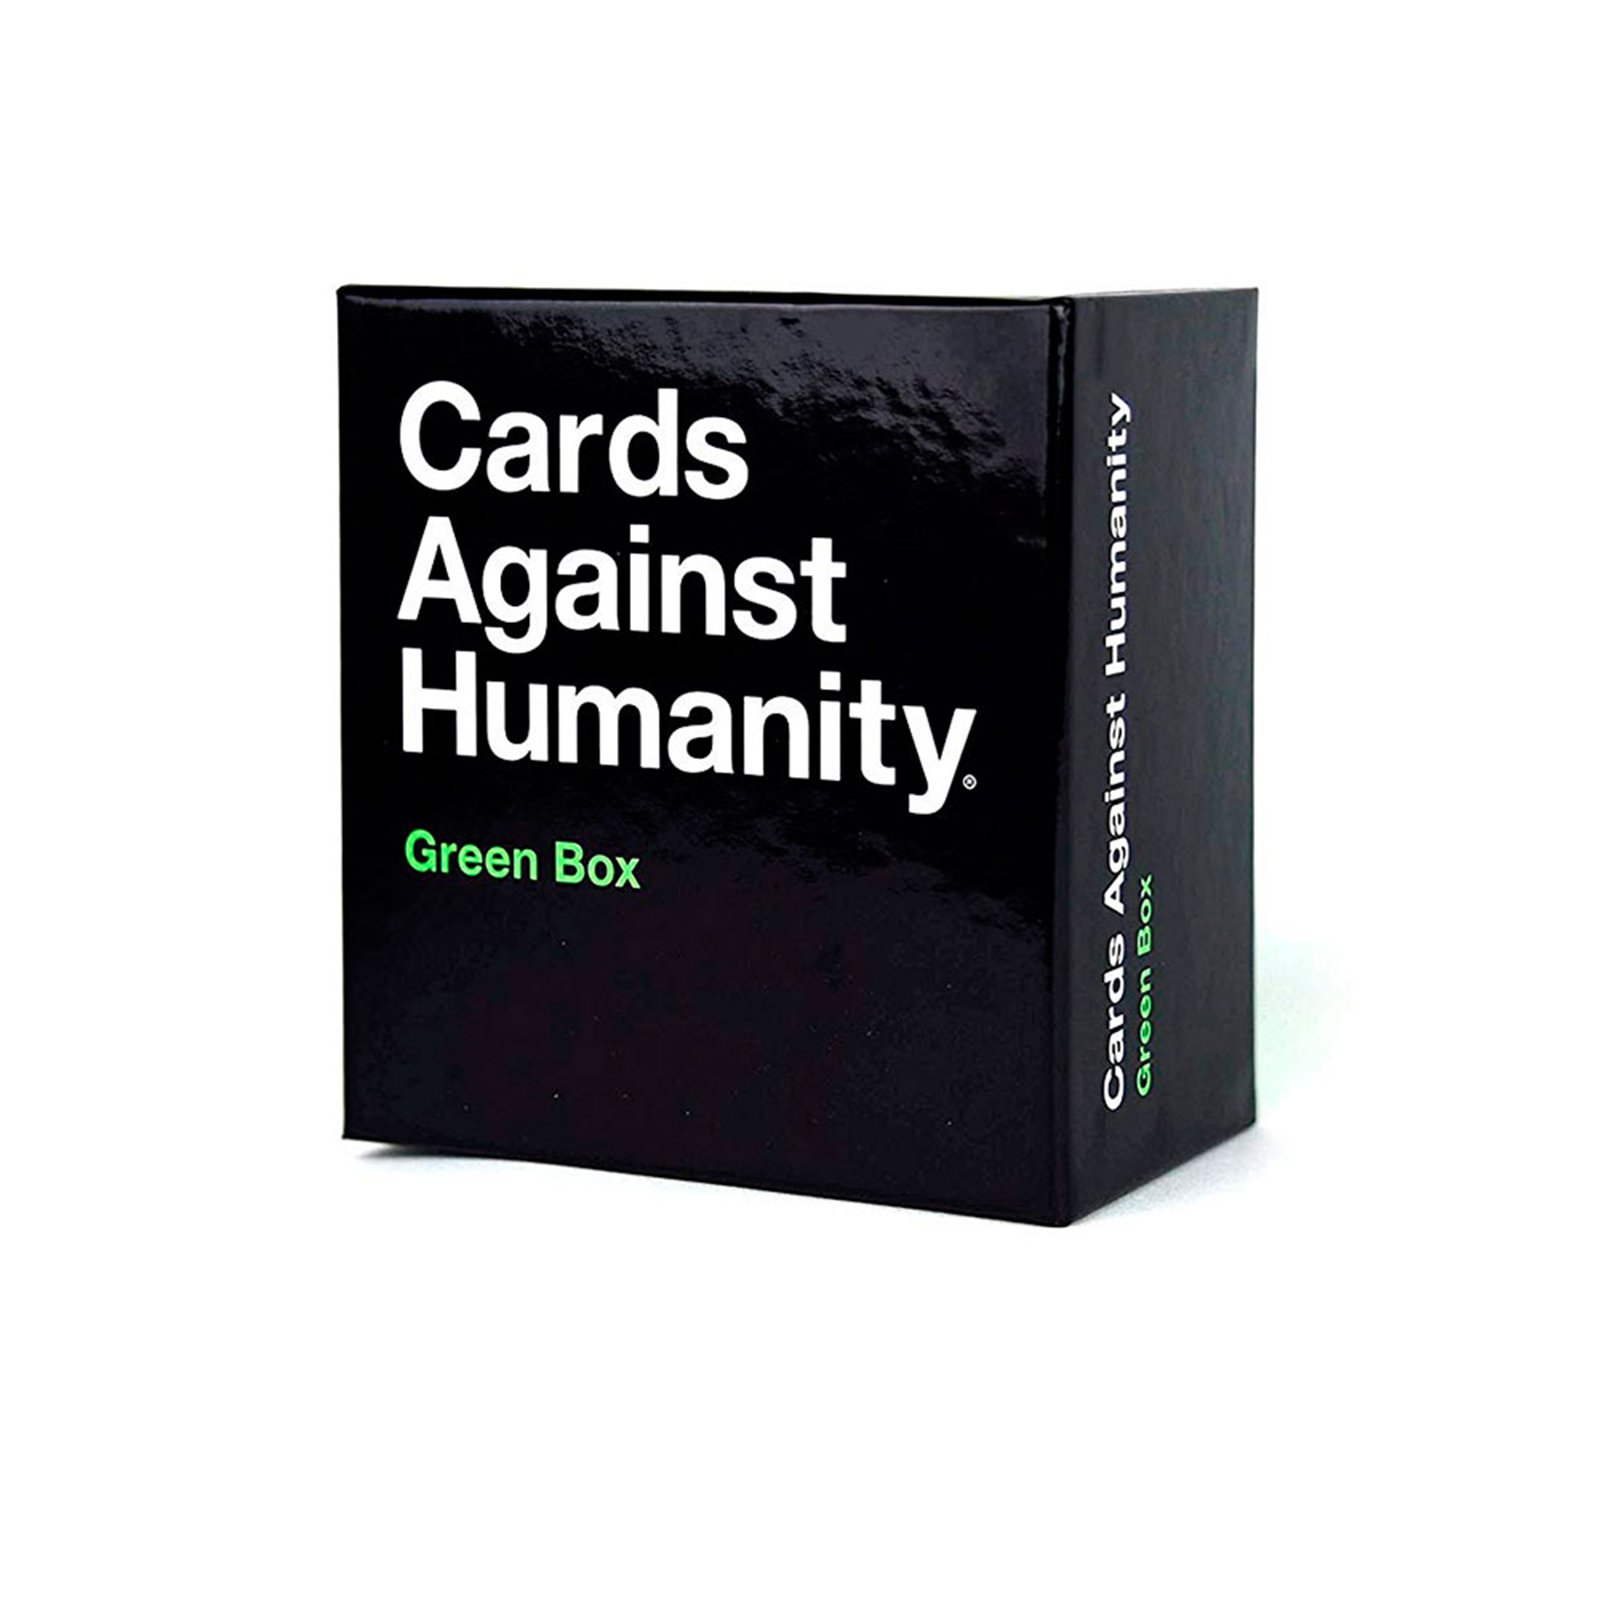 cards-against-humanity-green-box-popul-rt-selskabsspil